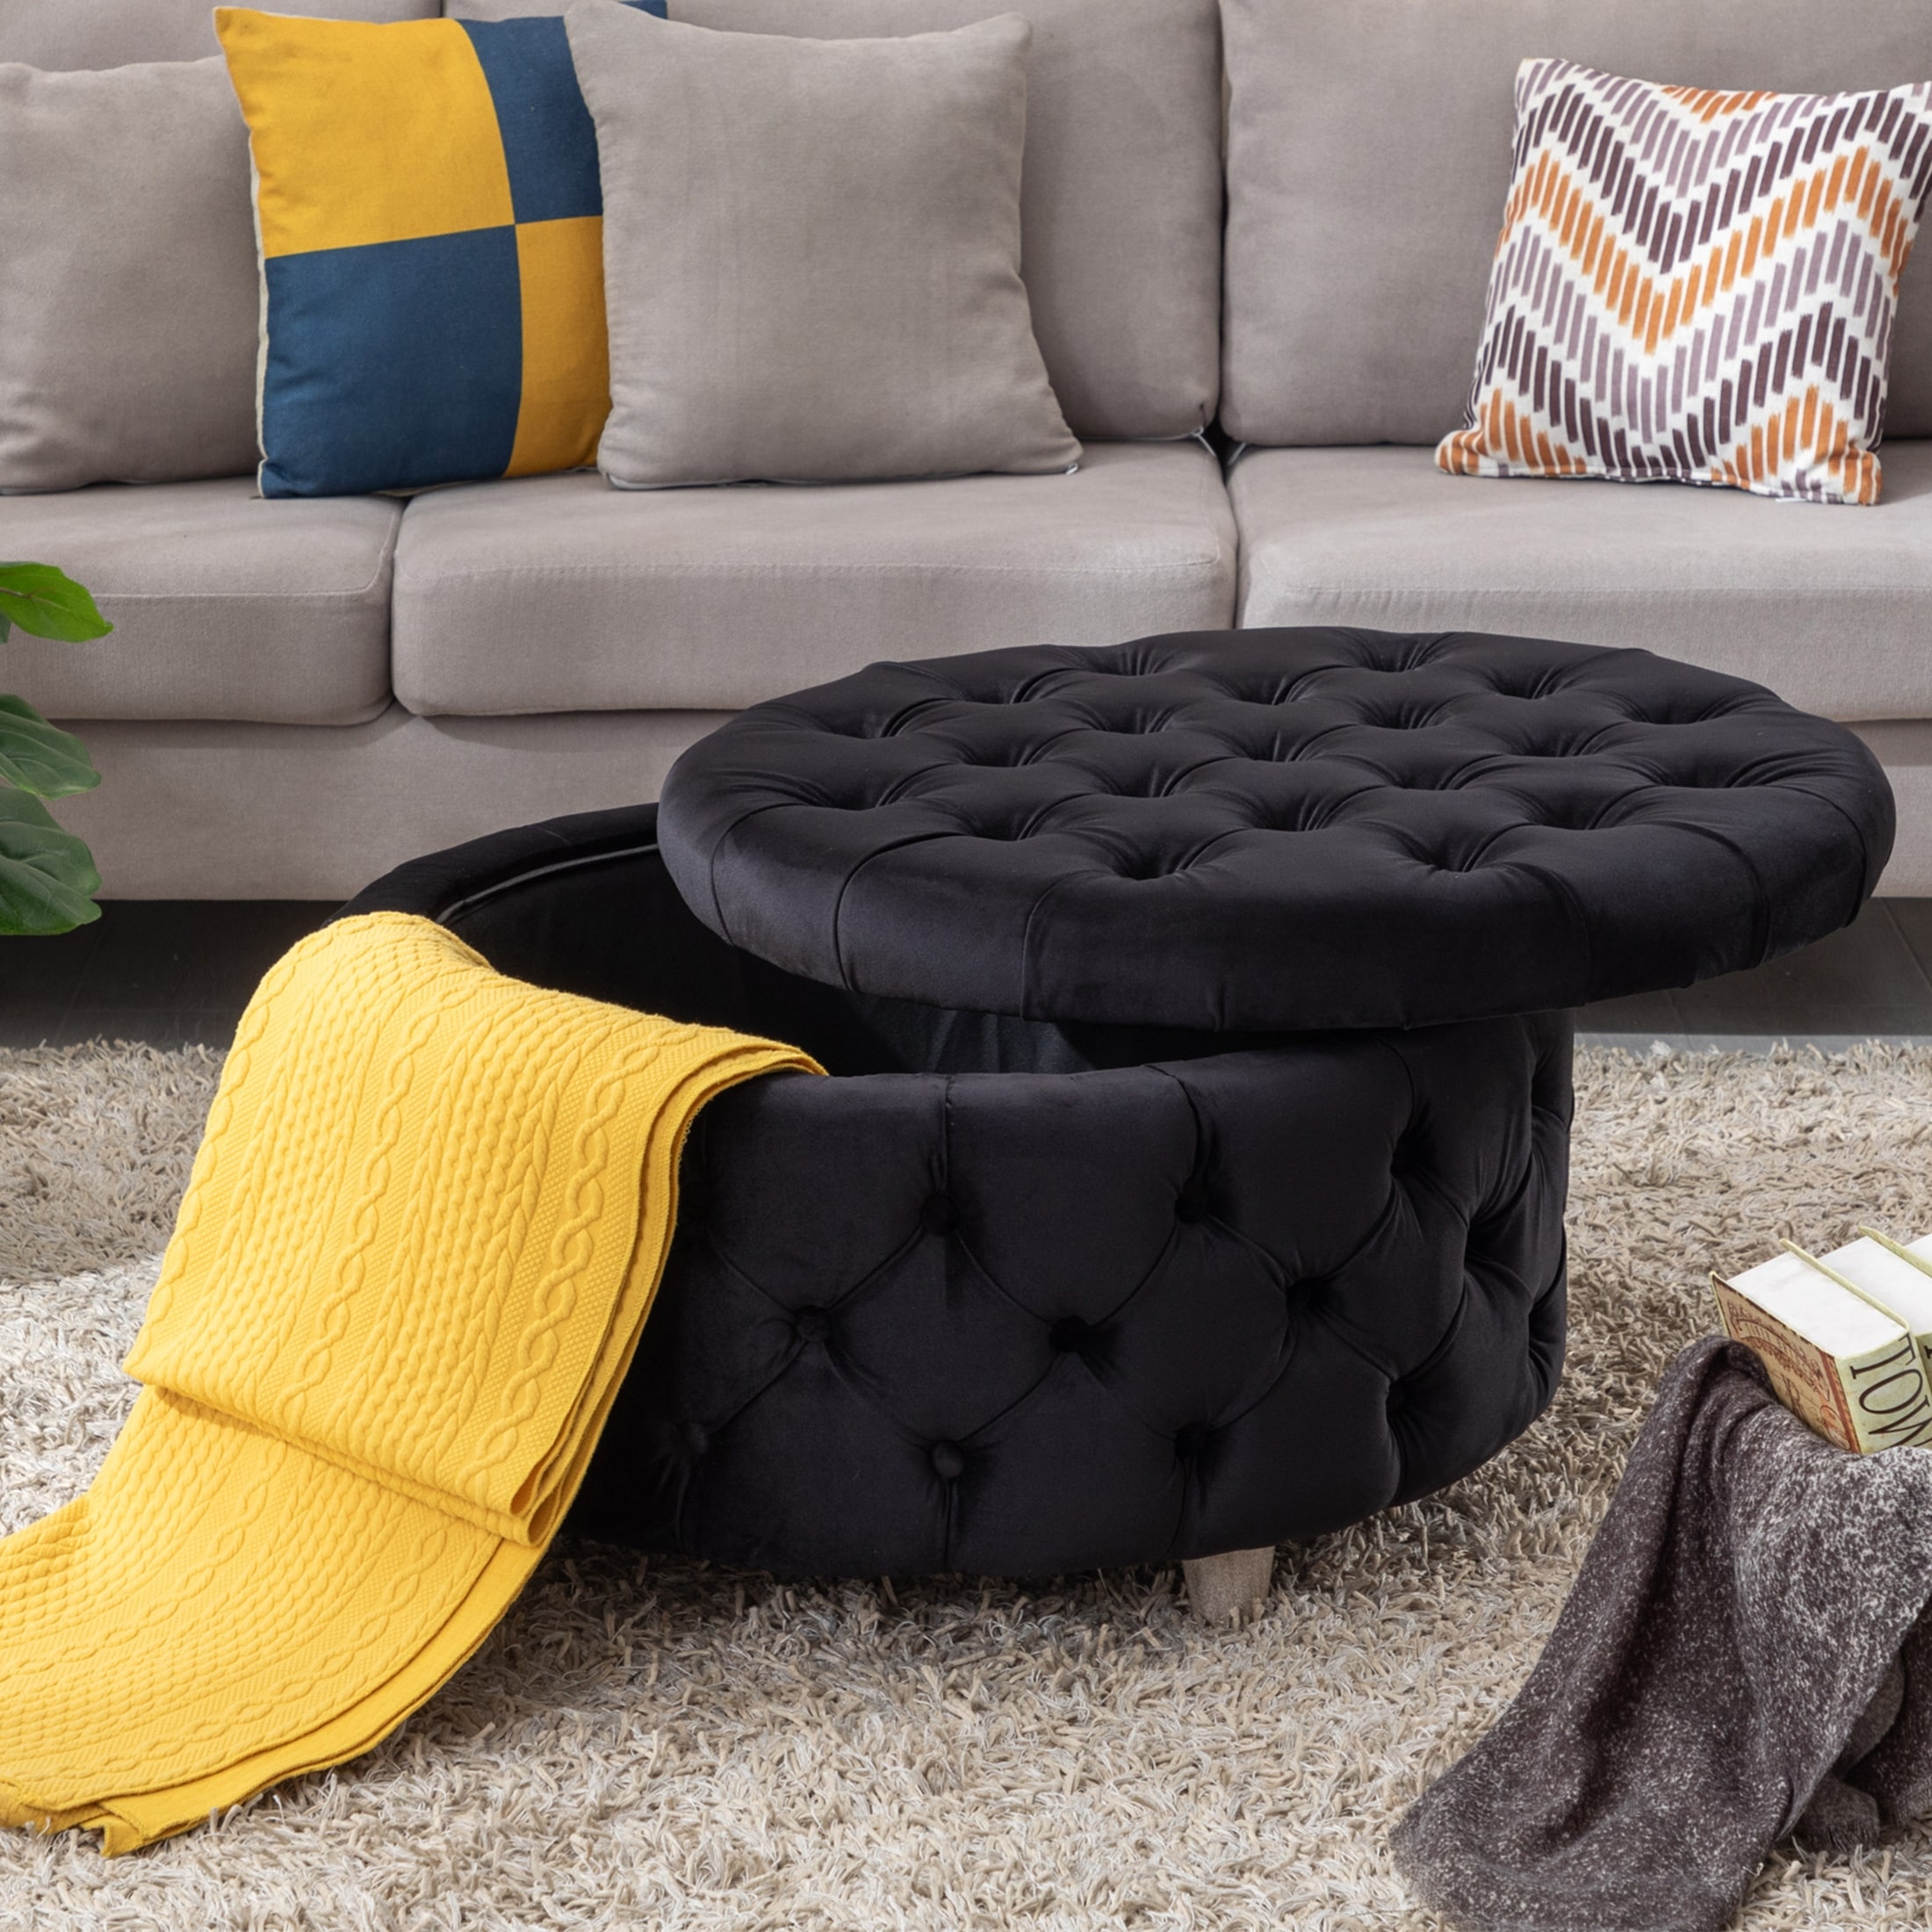 https://ak1.ostkcdn.com/images/products/is/images/direct/24c3947bfb08c3c83d01b93c9965f4e5043f68af/29.5%22-Wide-Velvet-Tufted-Round-Ottoman-With-Storage.jpg